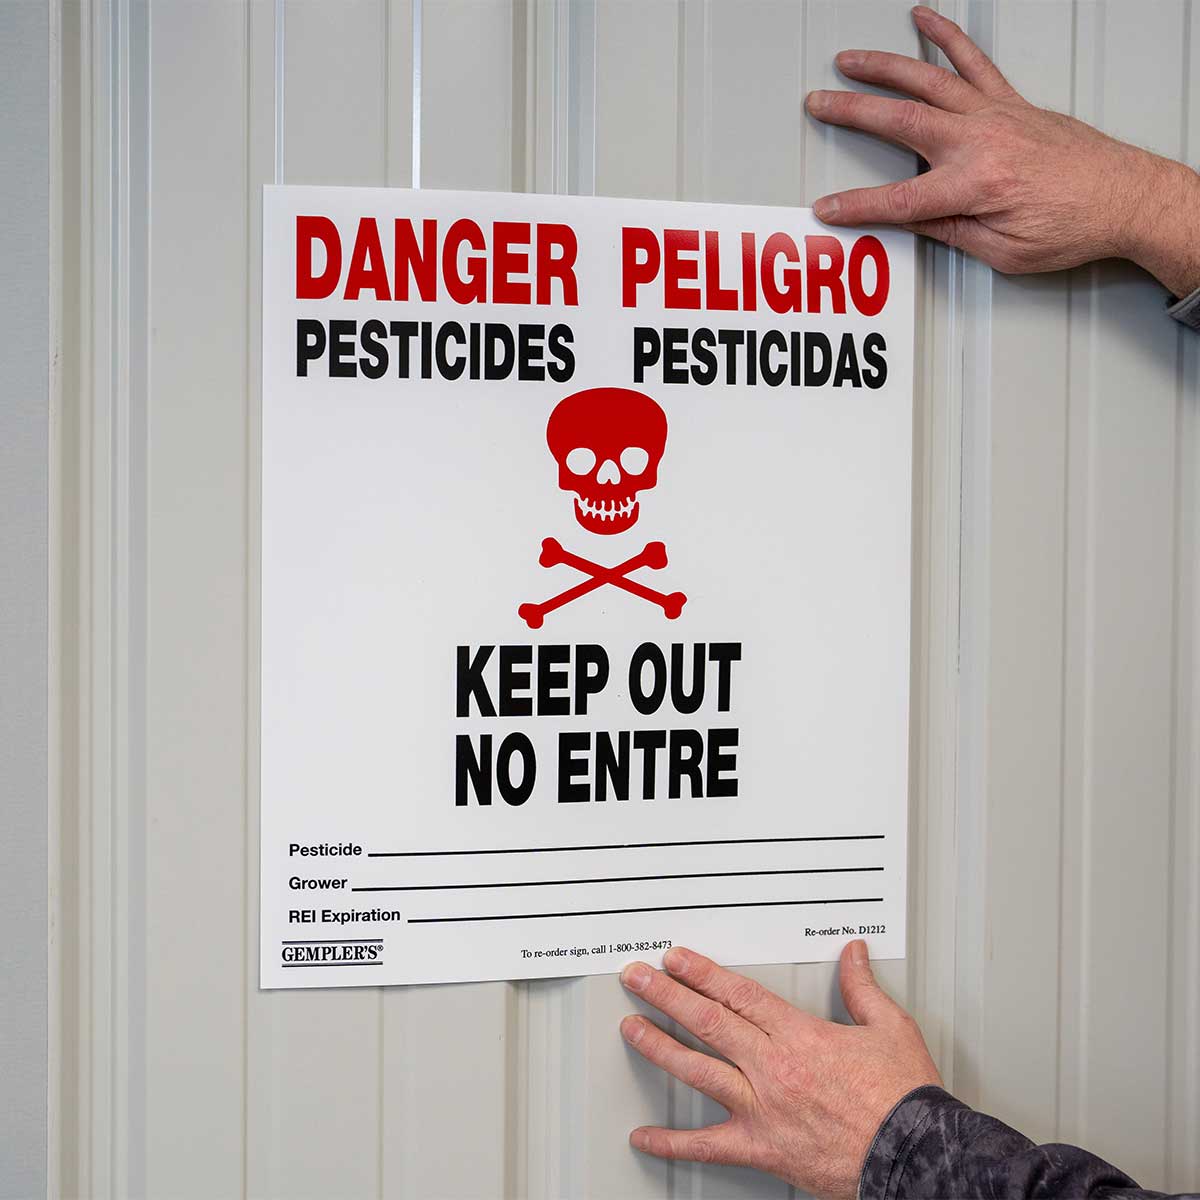 Gemplers 14"W x 16"H California Pesticide Warning Sign